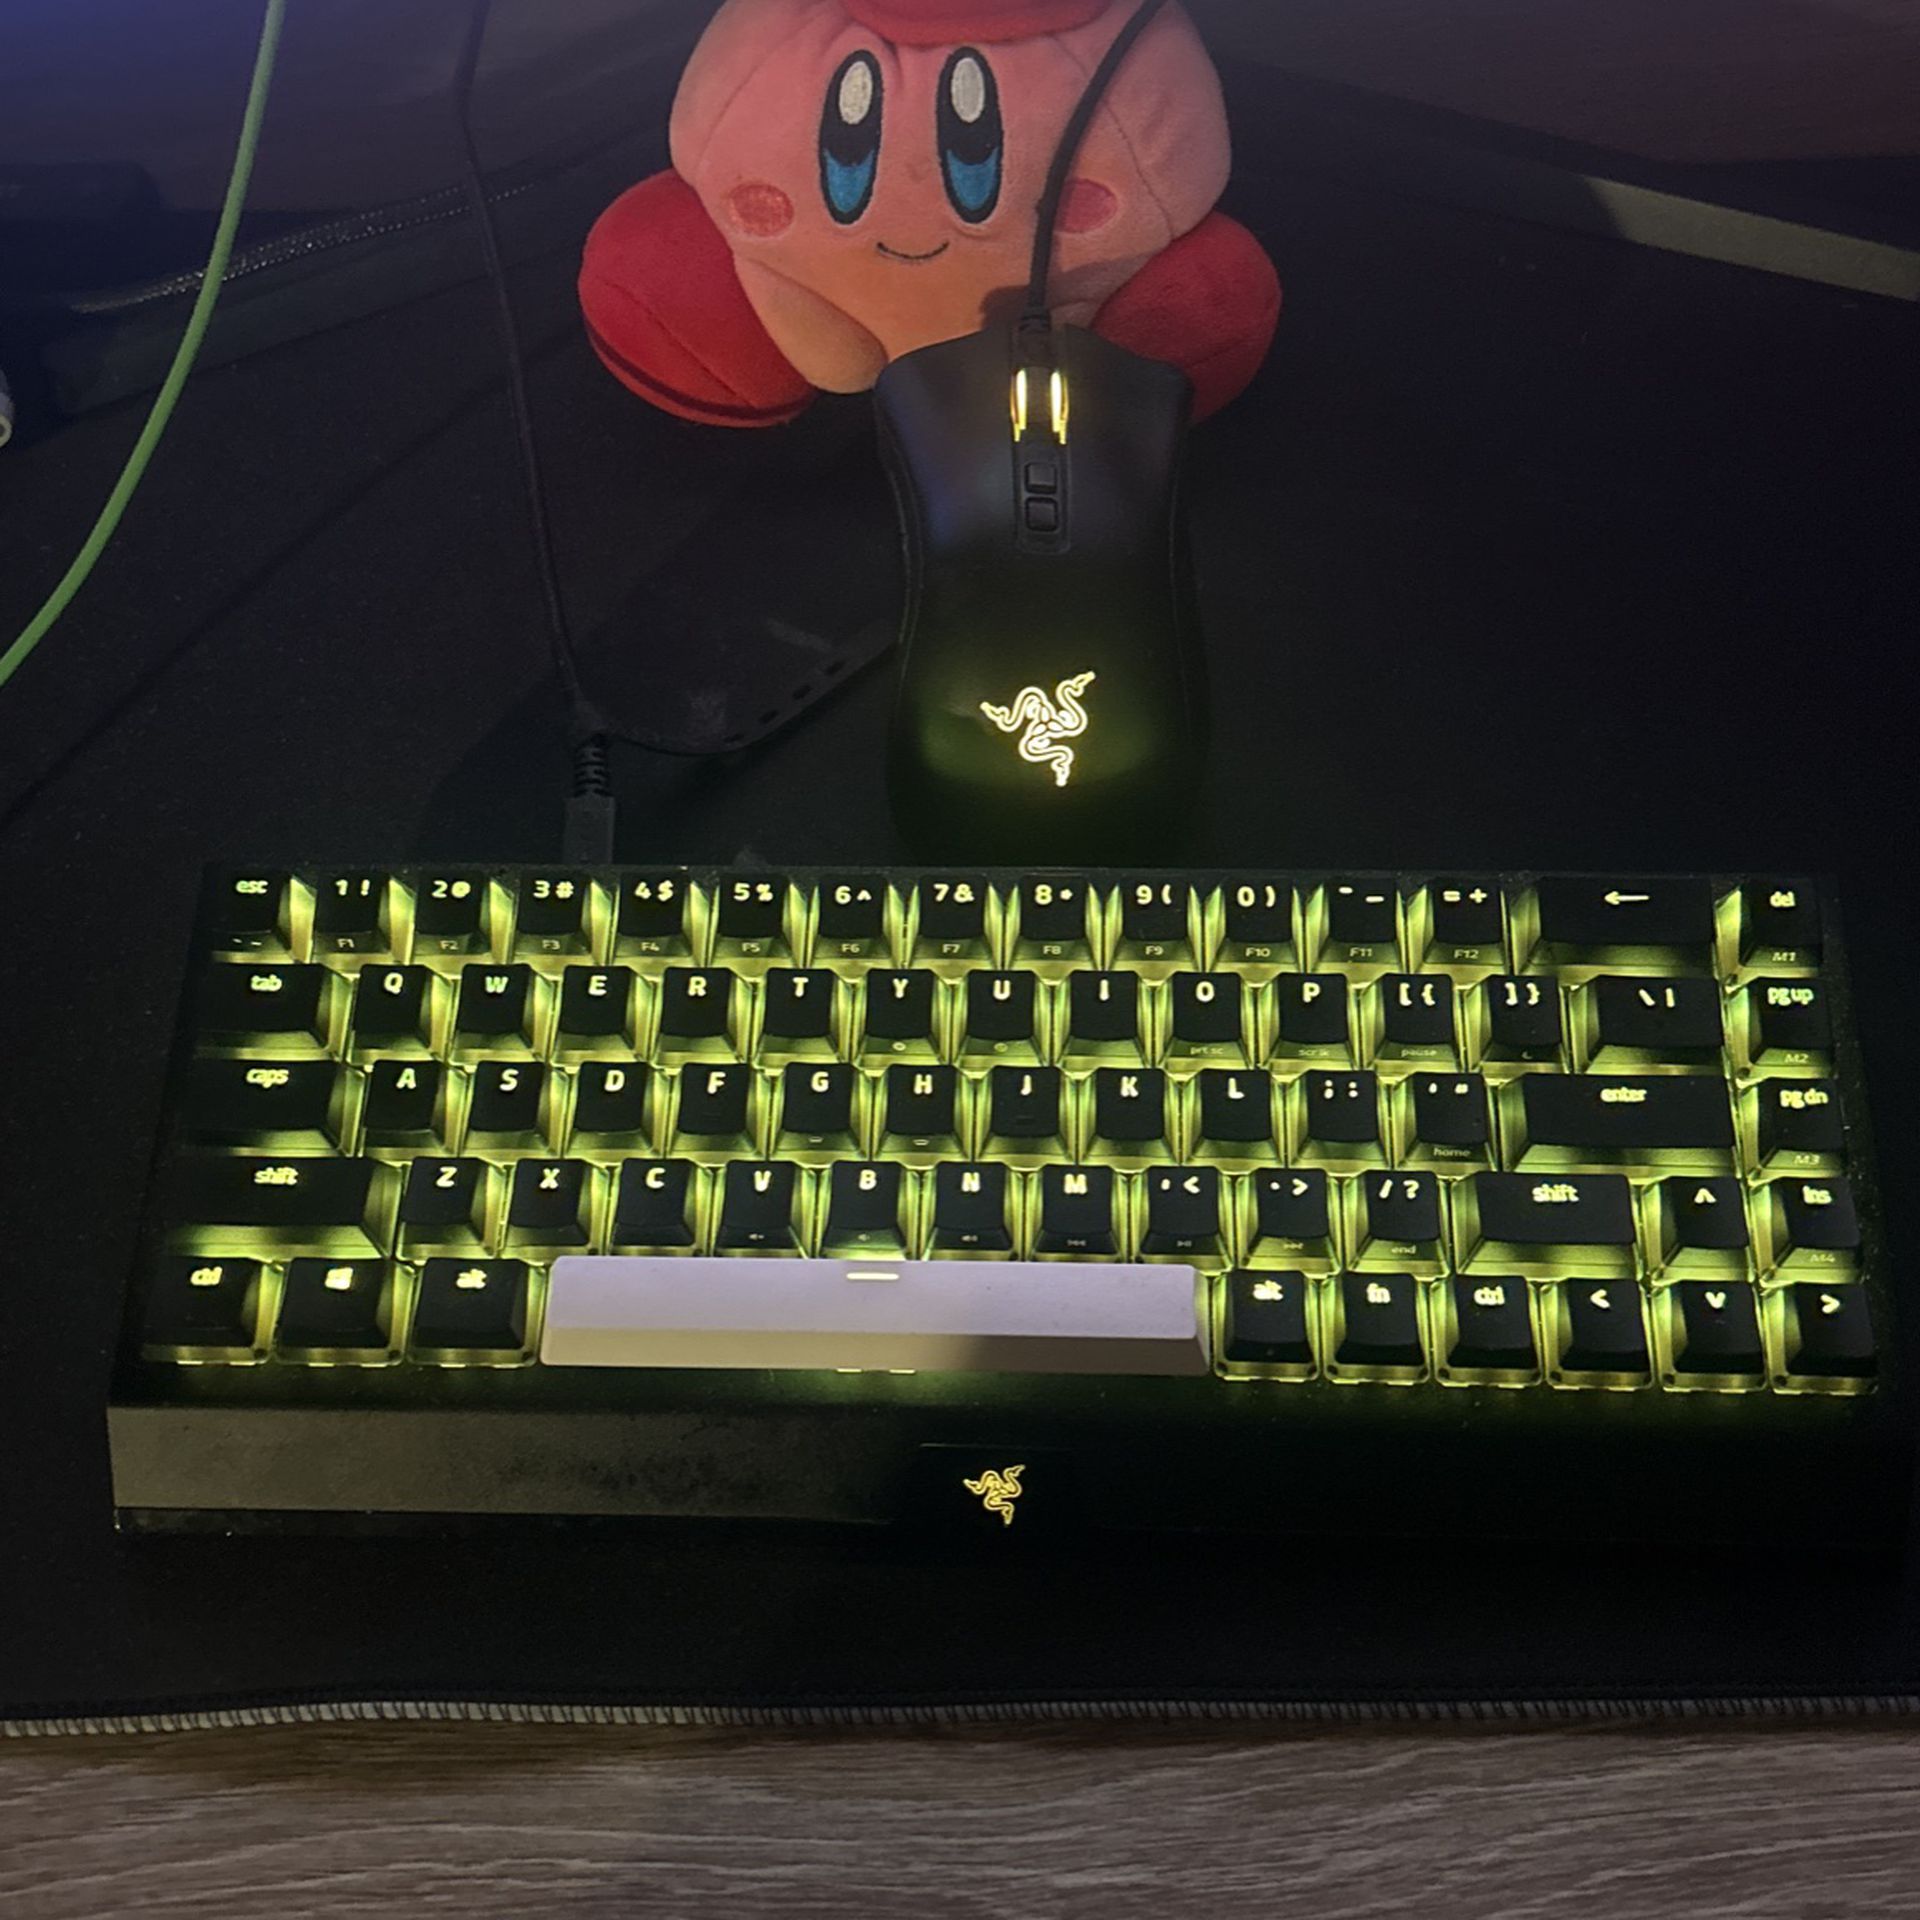 Razor Mouse and keyboard 